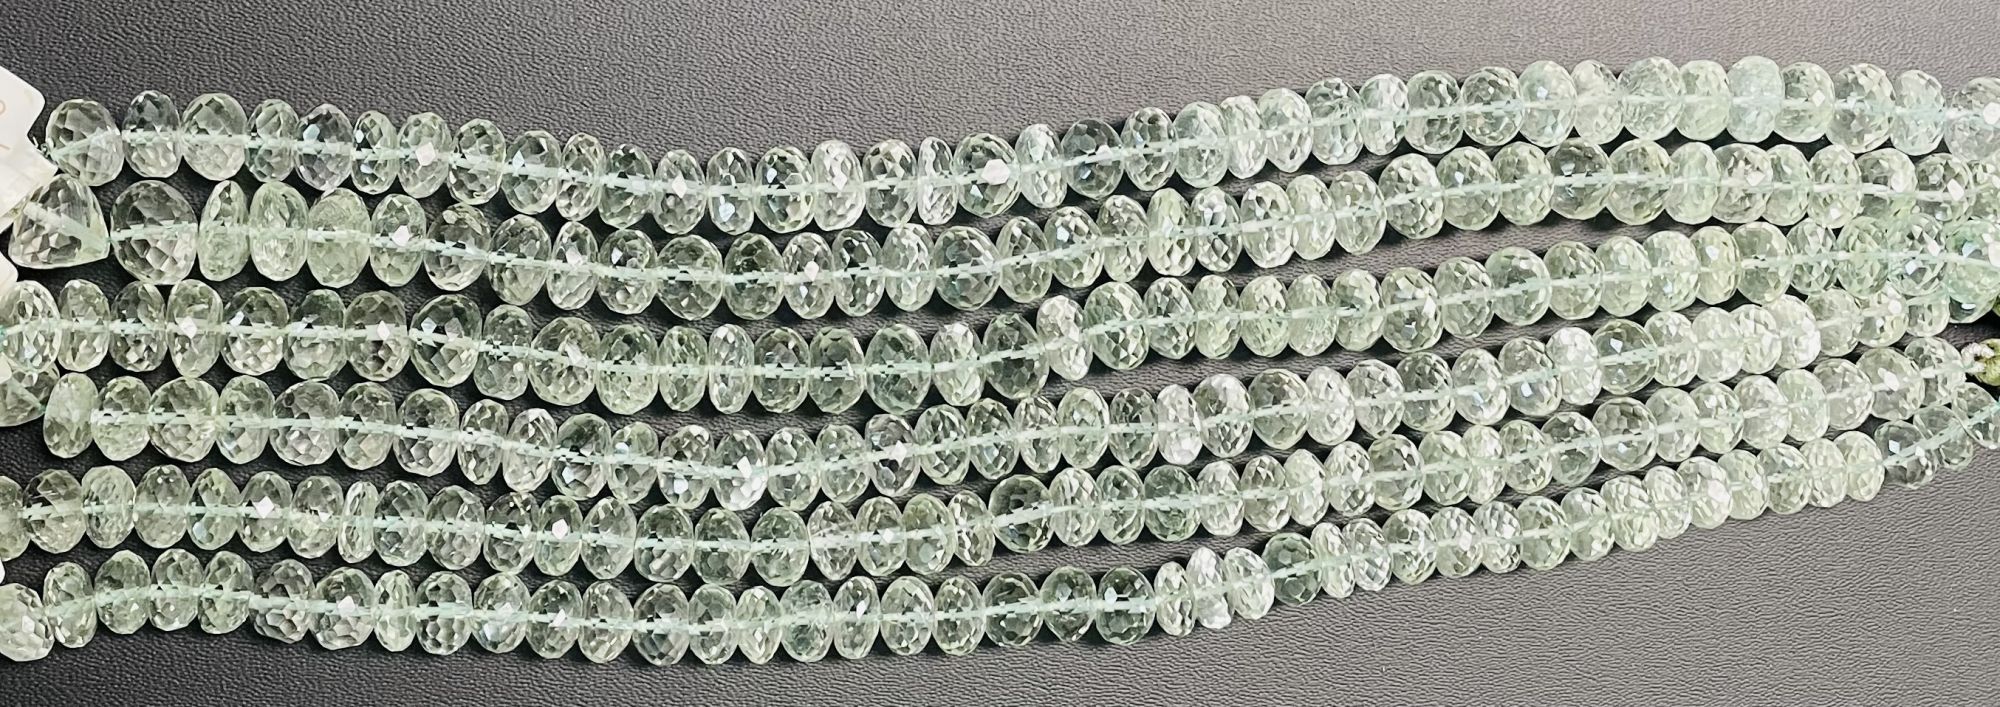 Green Amethyst Rondelle Faceted